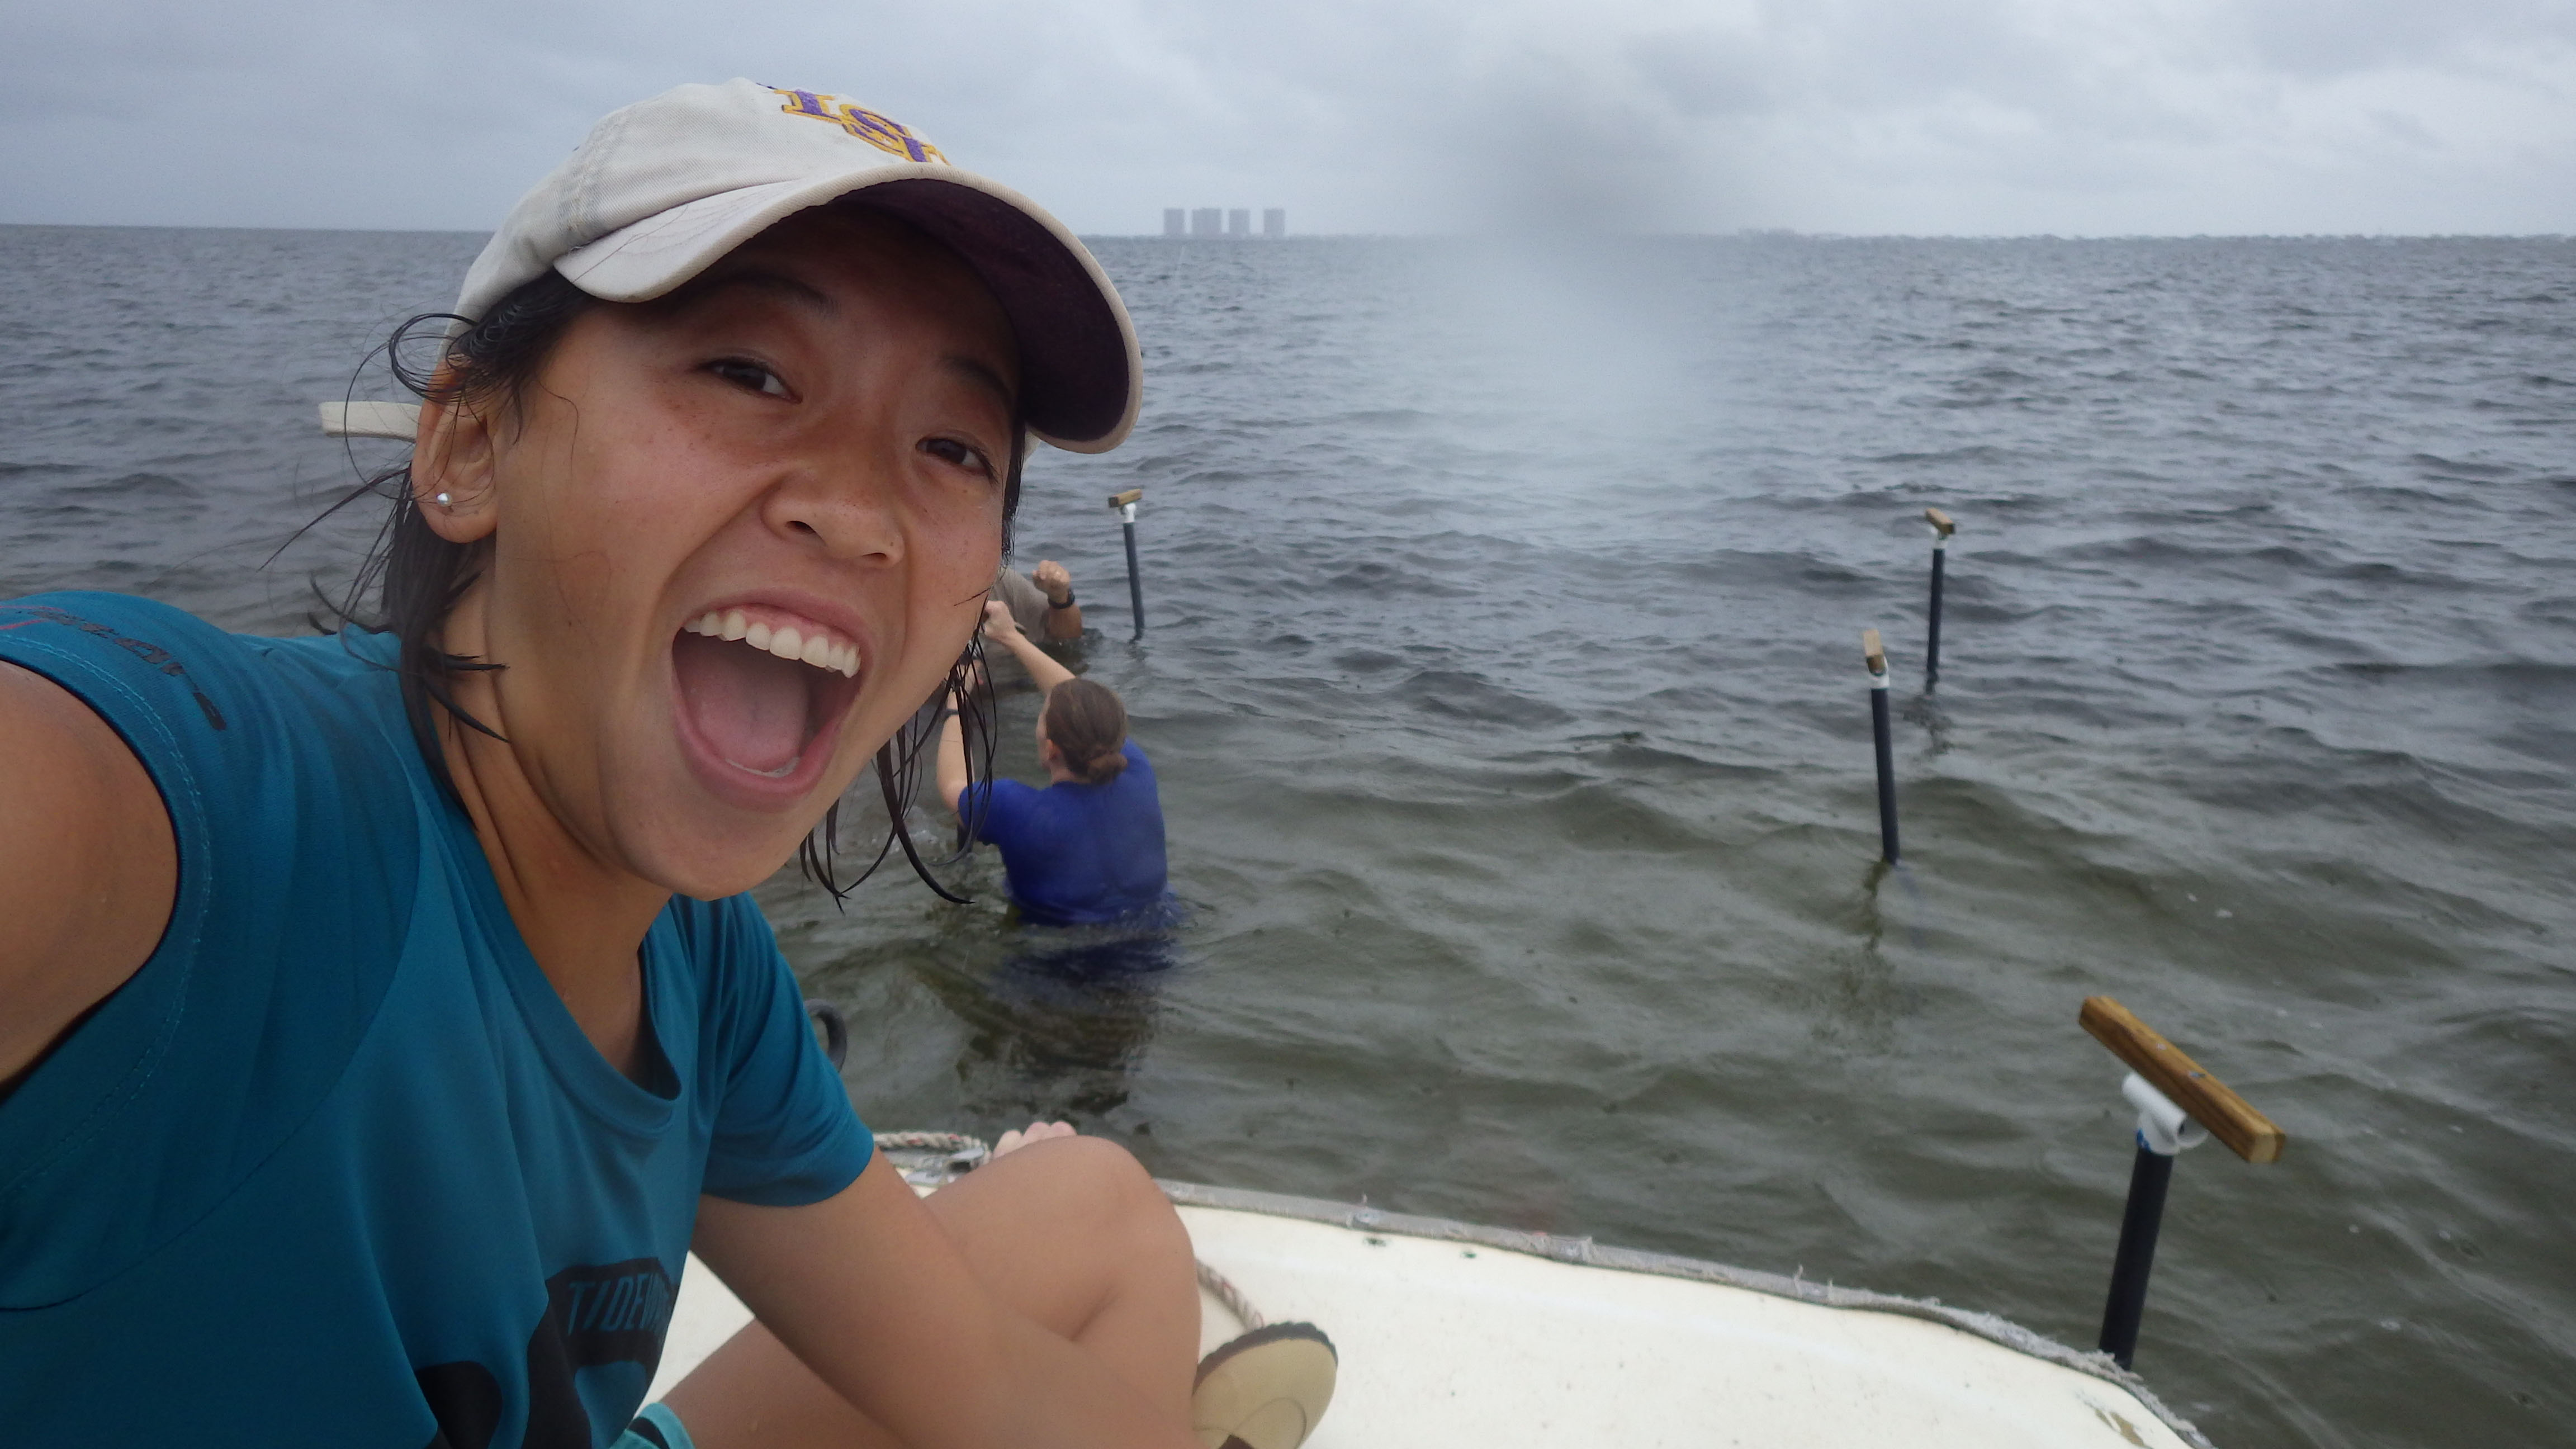 Emelia Marshall on the boat during field work.